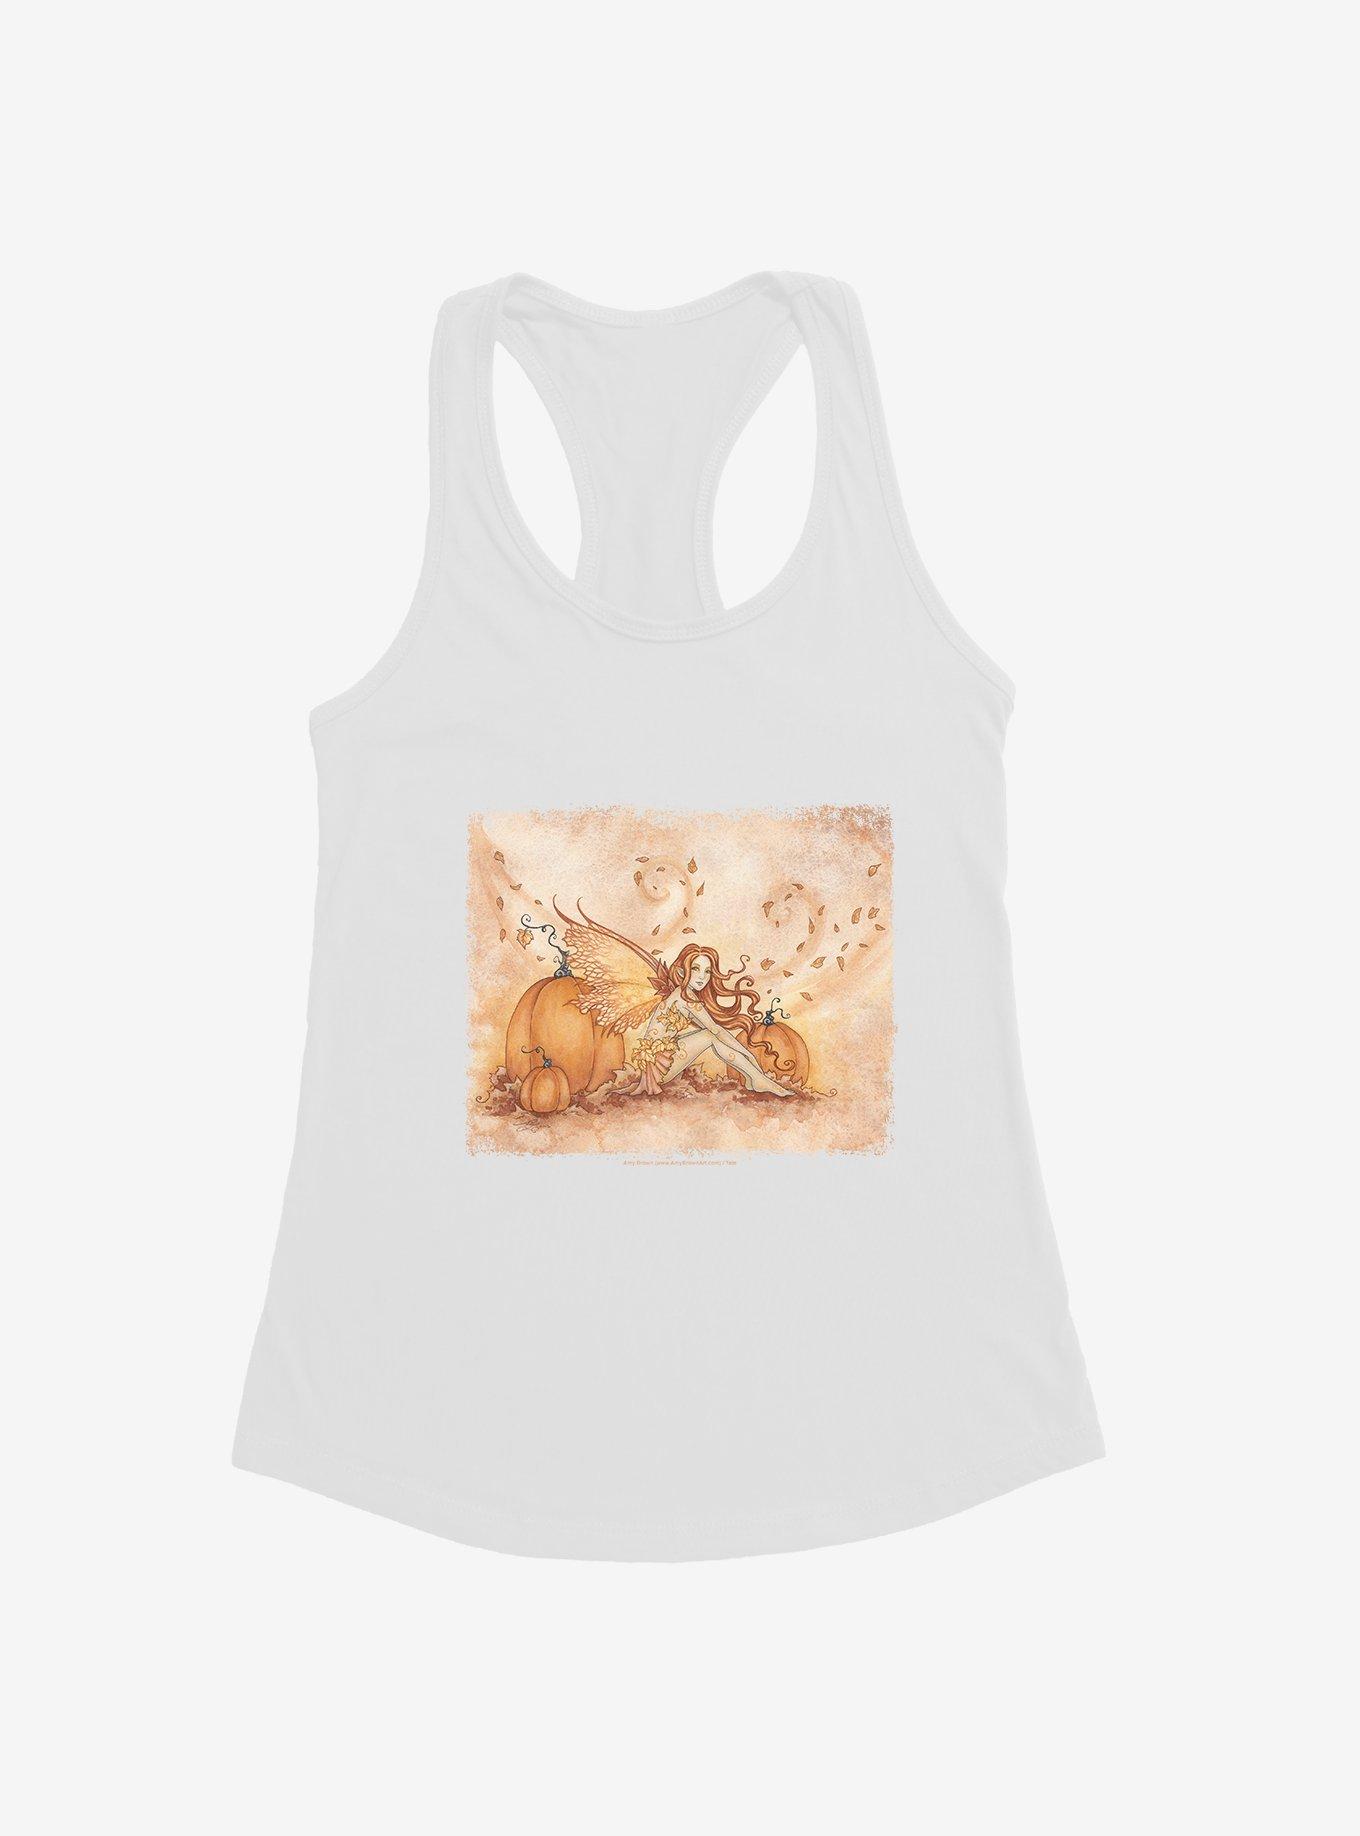 Autumn Fae Girls Tank by Amy Brown